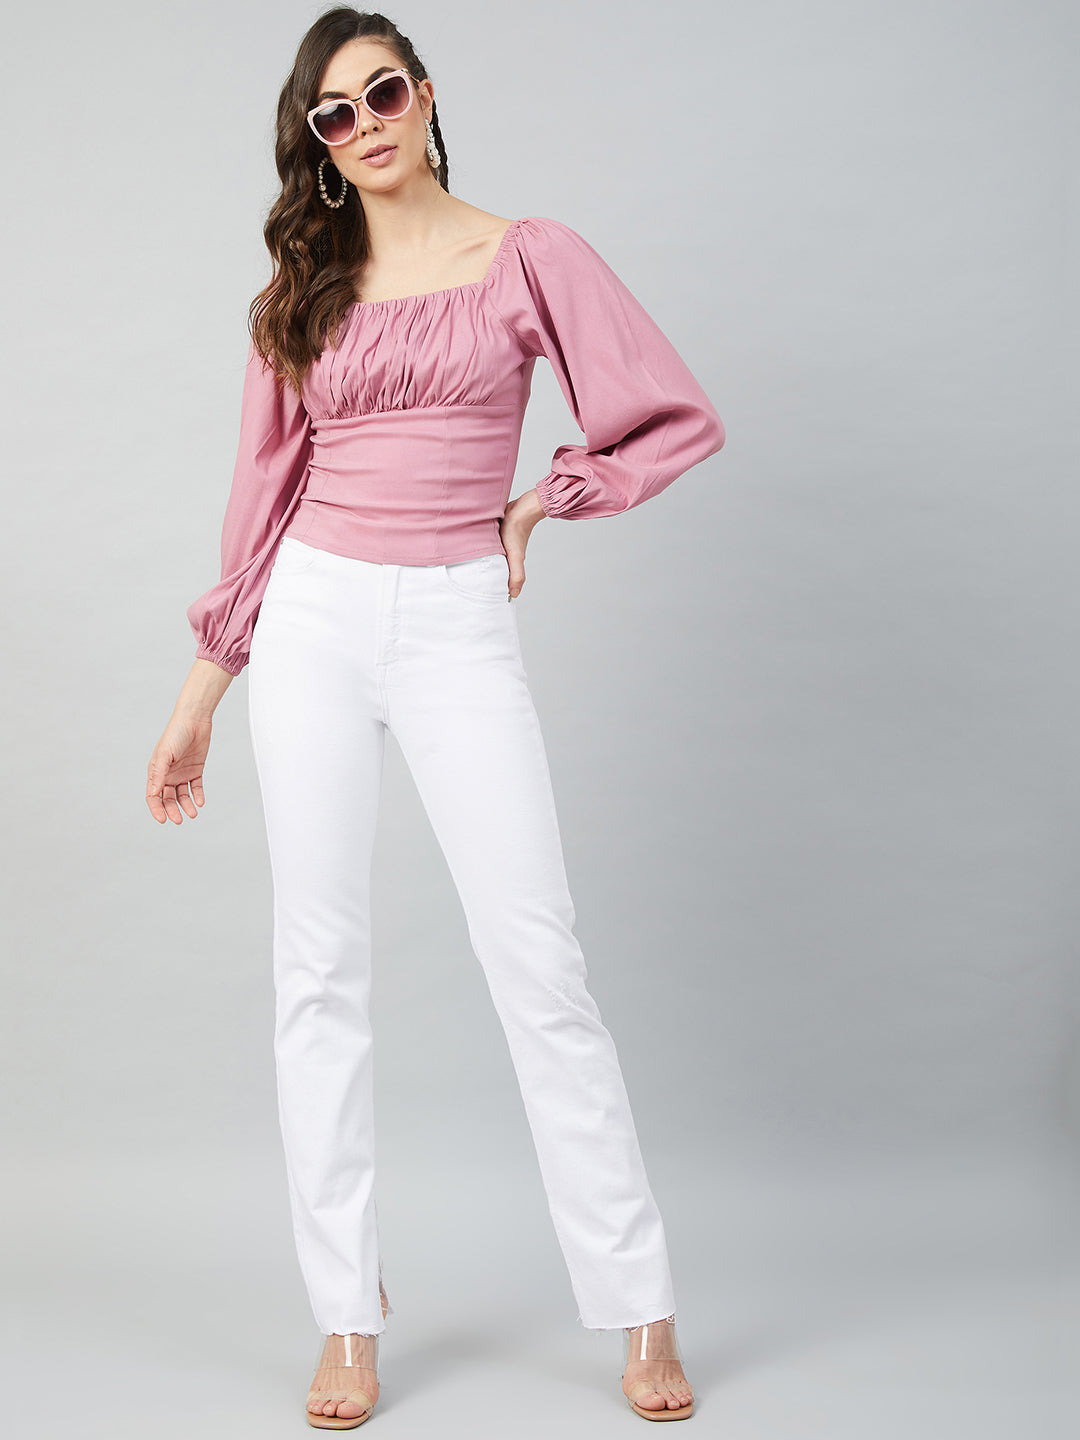 Athena Pink Puff Sleeve Ruched Fitted Top - Athena Lifestyle